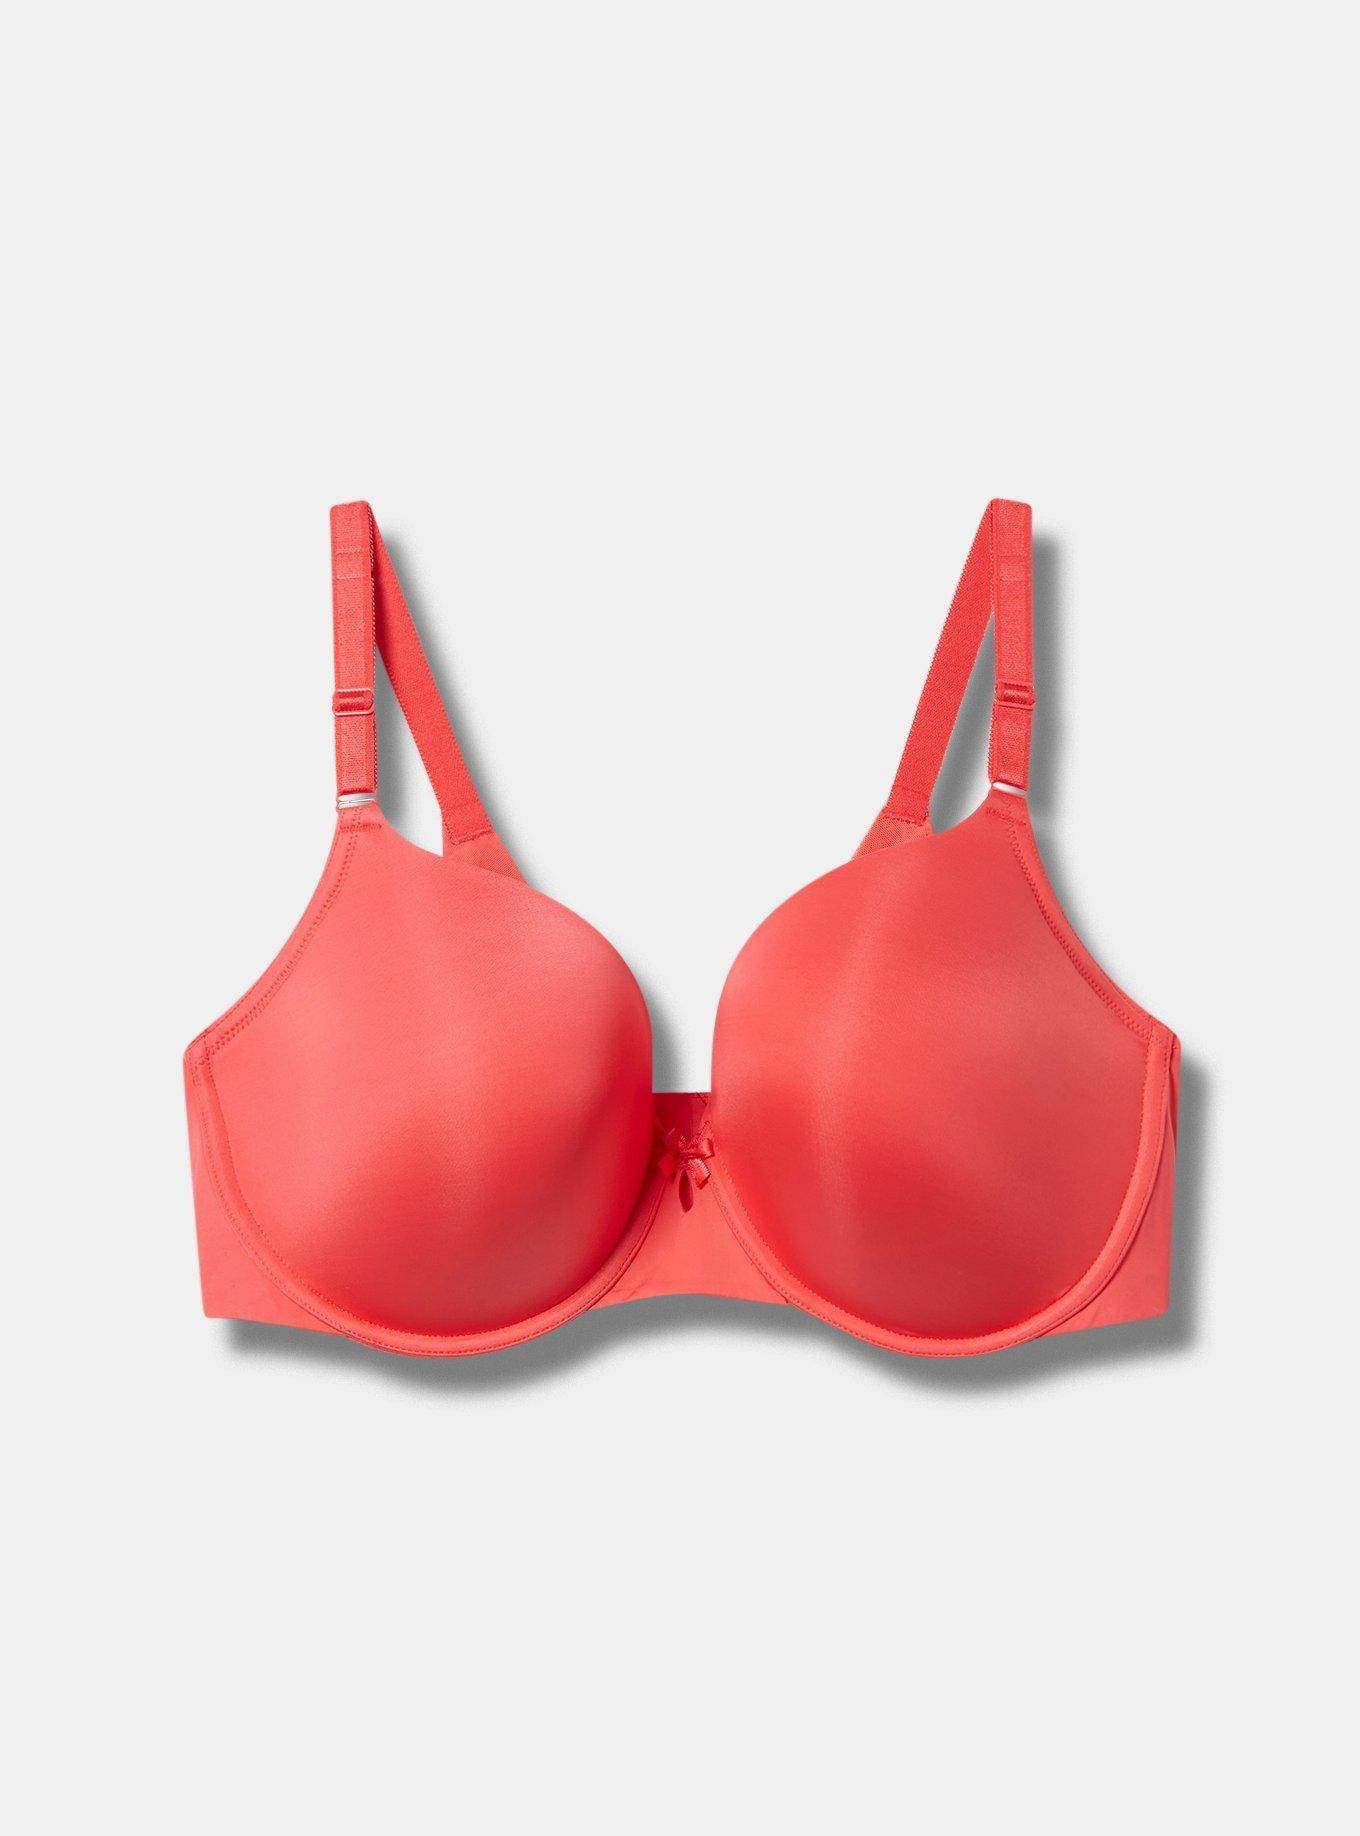 46d Pink T Shirt Bra - Get Best Price from Manufacturers